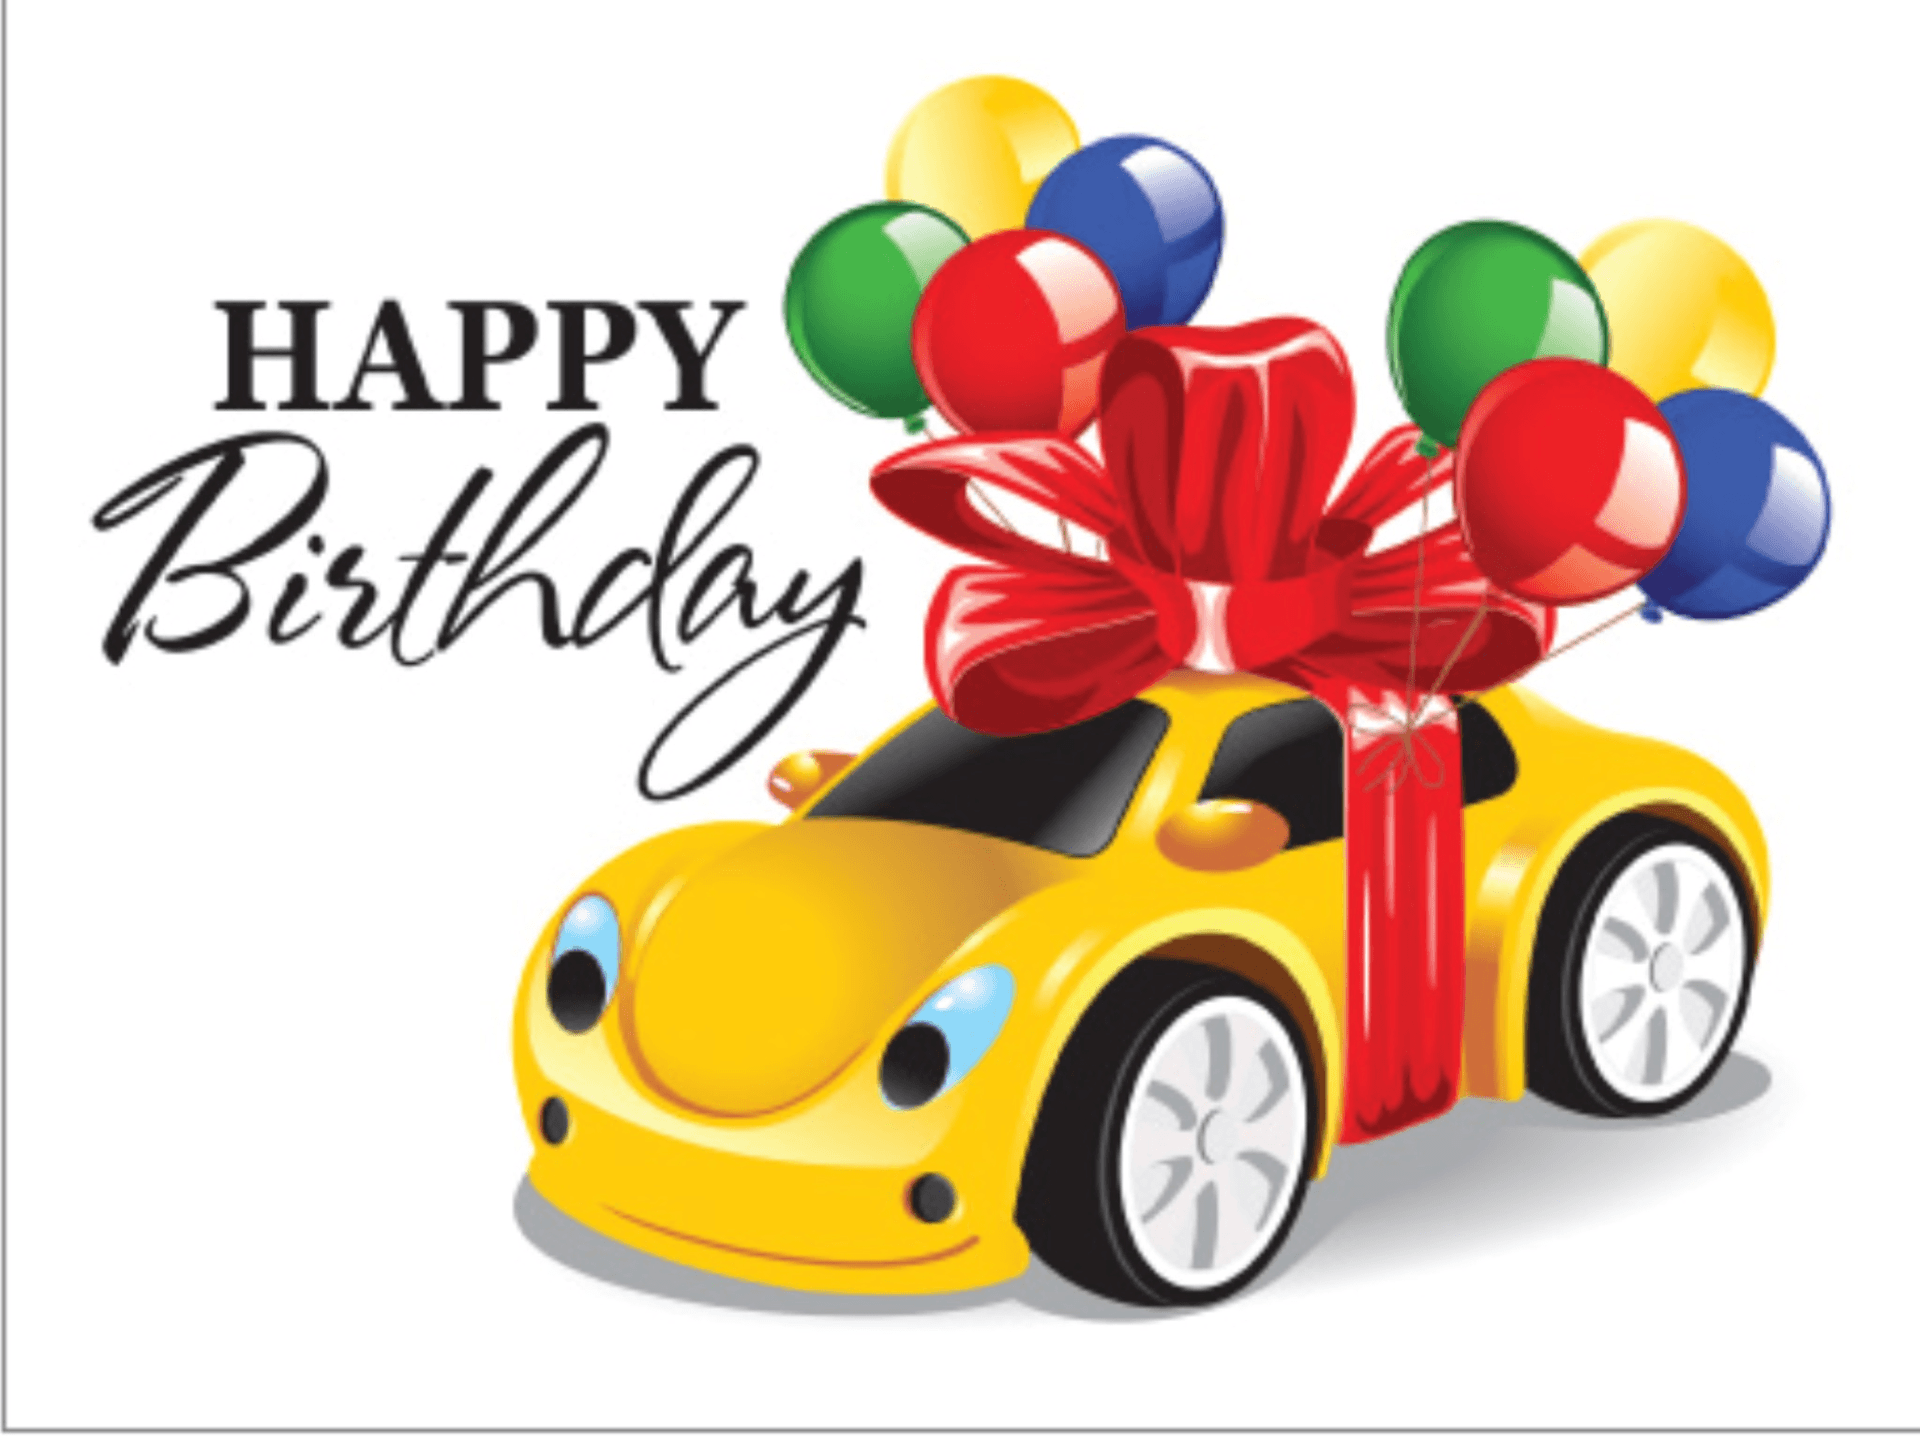 Book a 1.5 hour driving lesson on the day/week of your birthday , receive a...